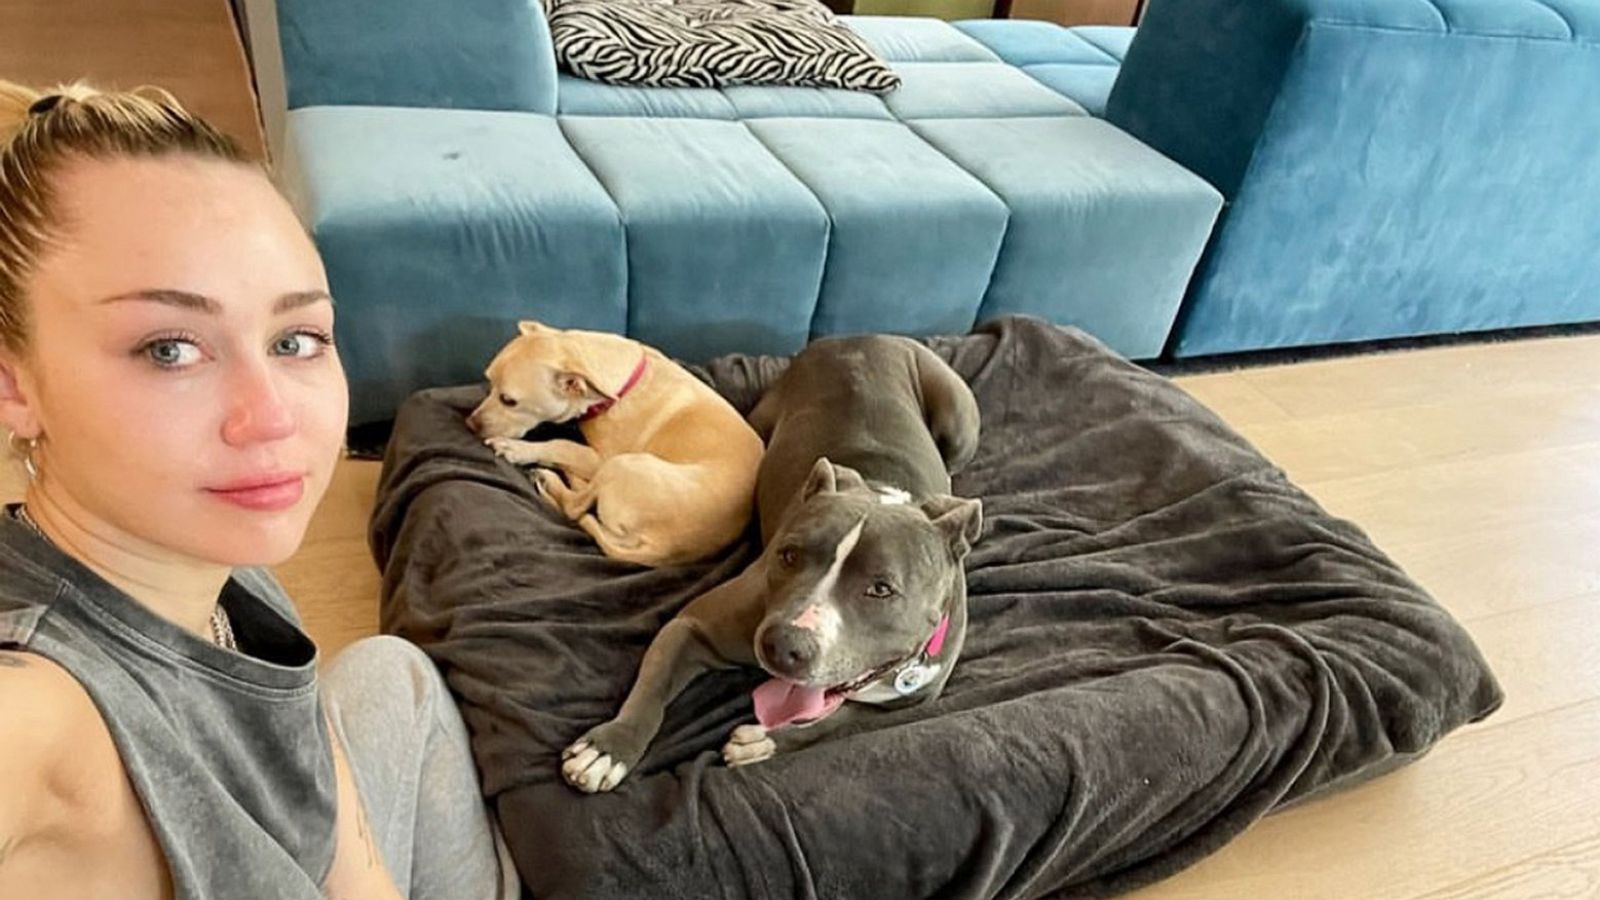 PHOTO: Miley Cyrus posted to her Instagram account this photo of her newly adopted pit bull.